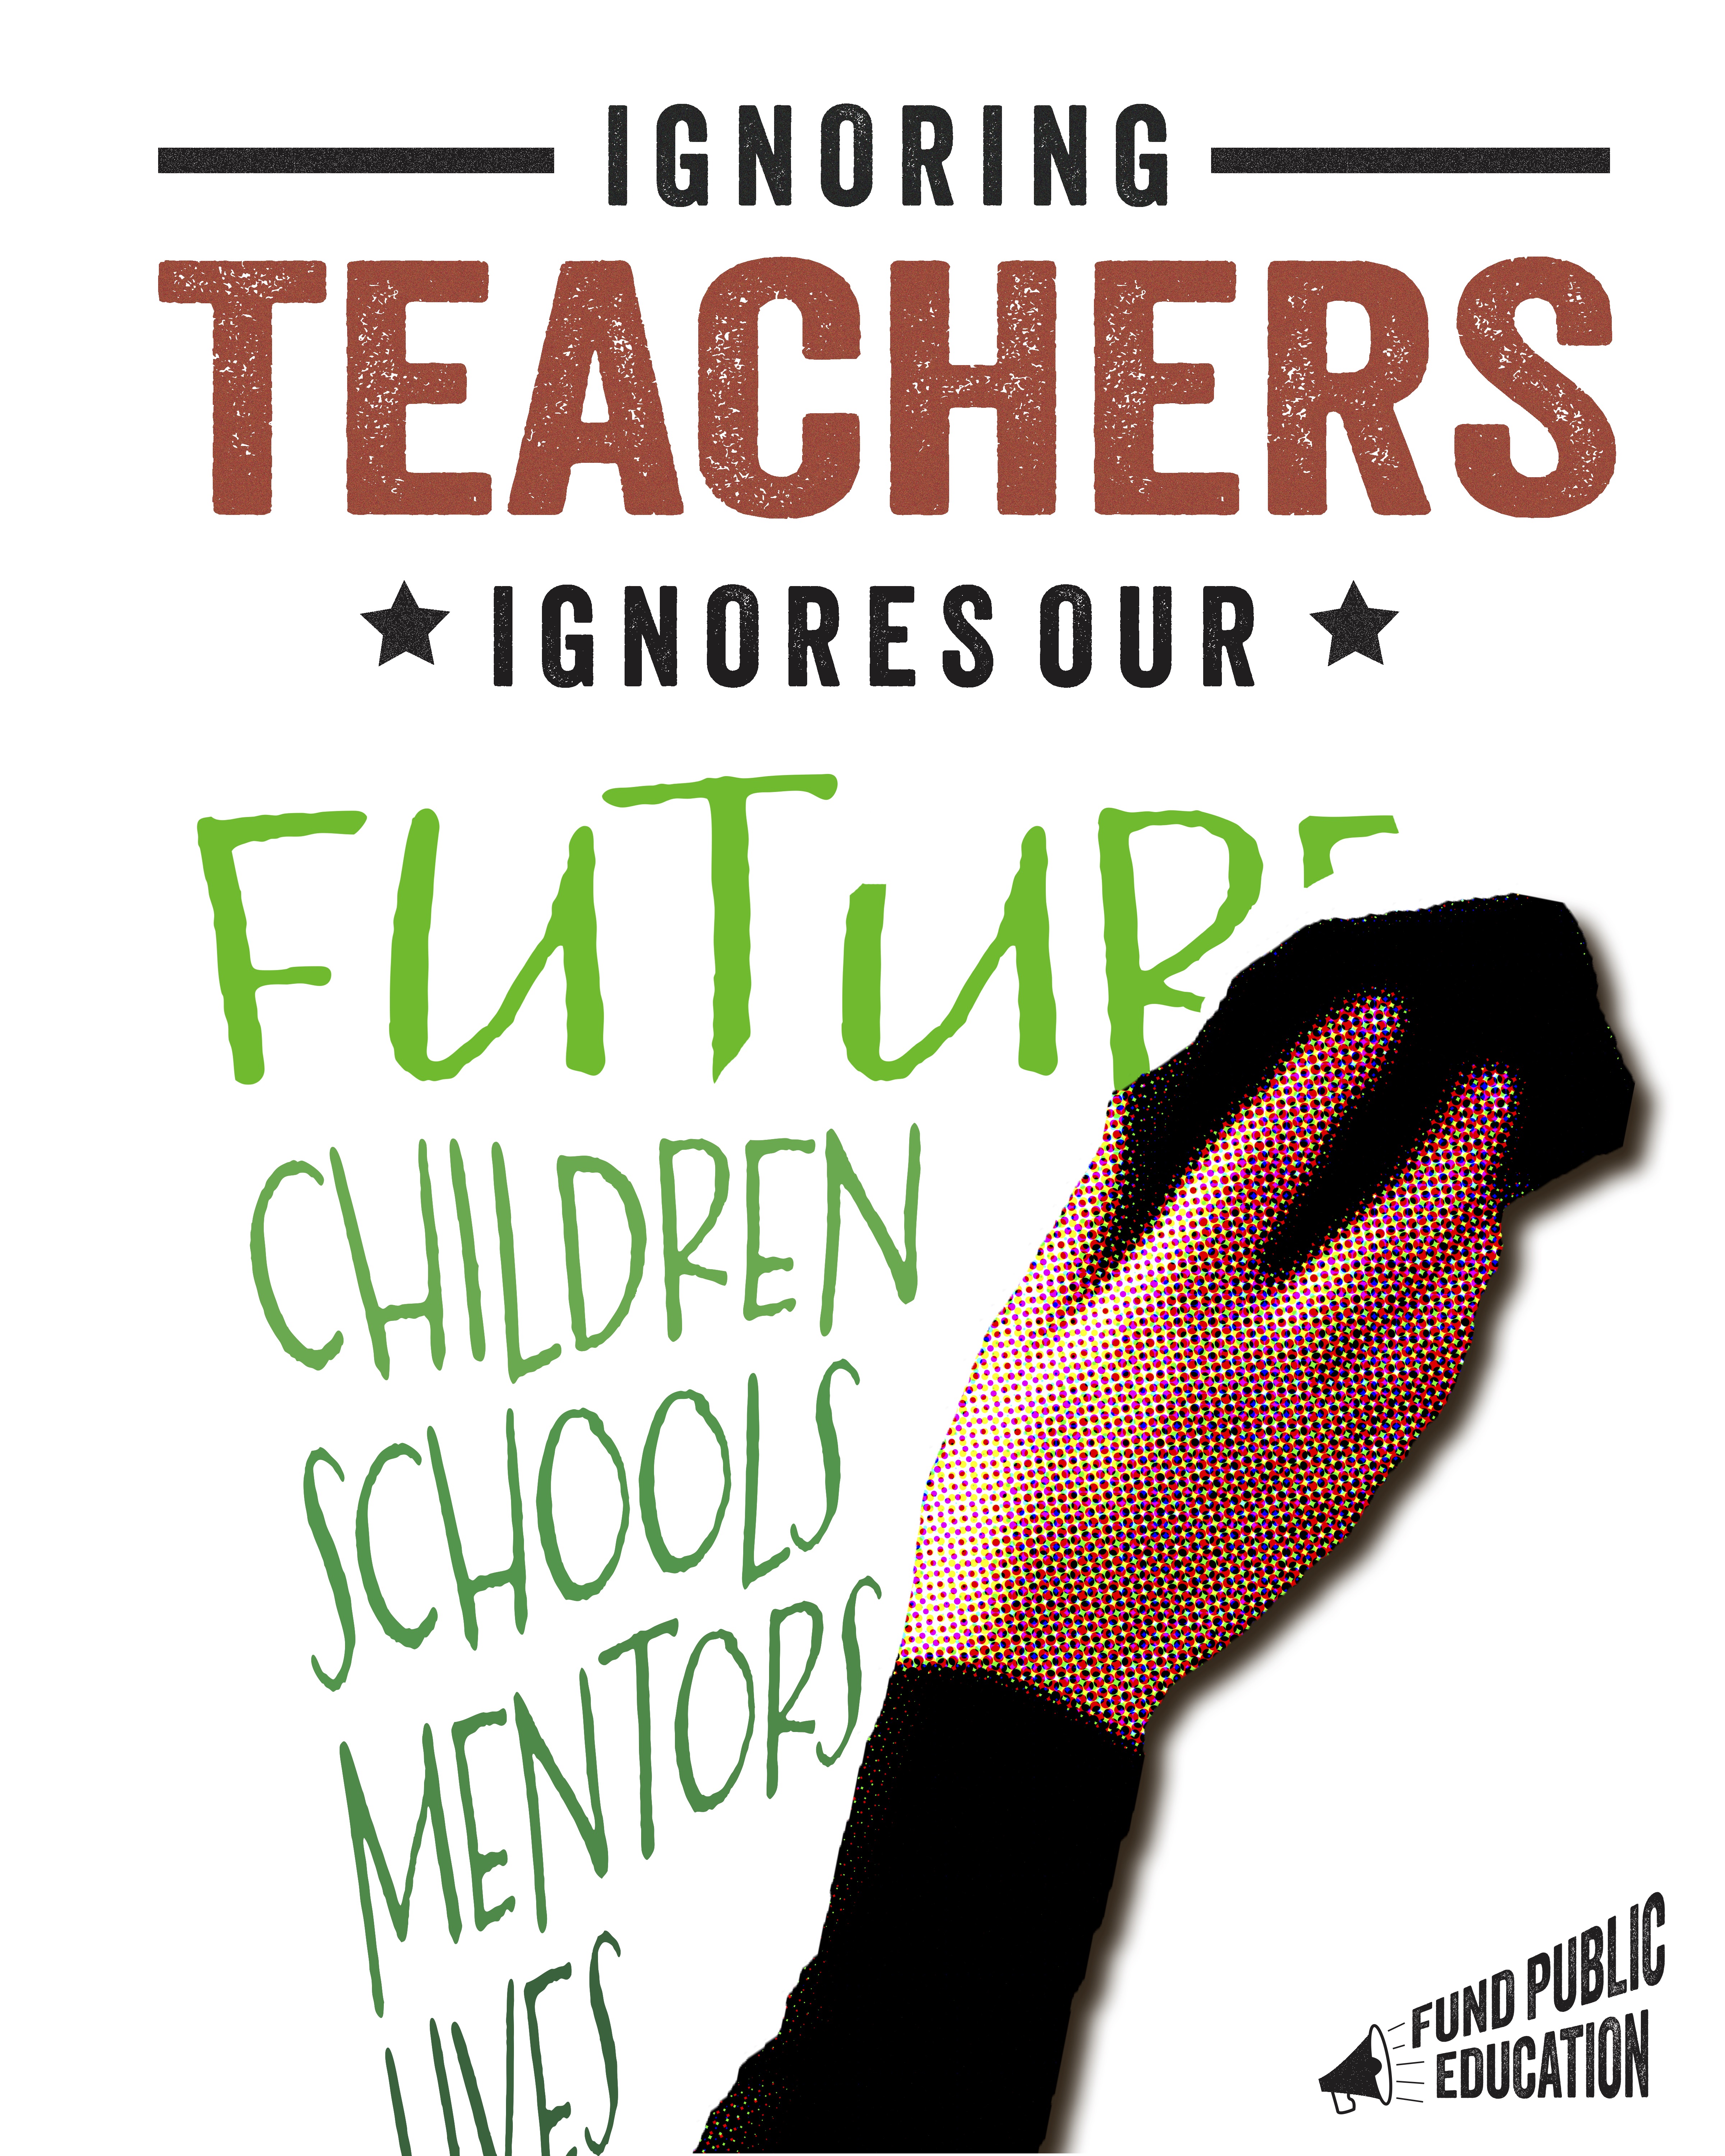 A graphic poster promoting teachers rights. There is a hand erasing the word "future, children, schools, mentors, lives."